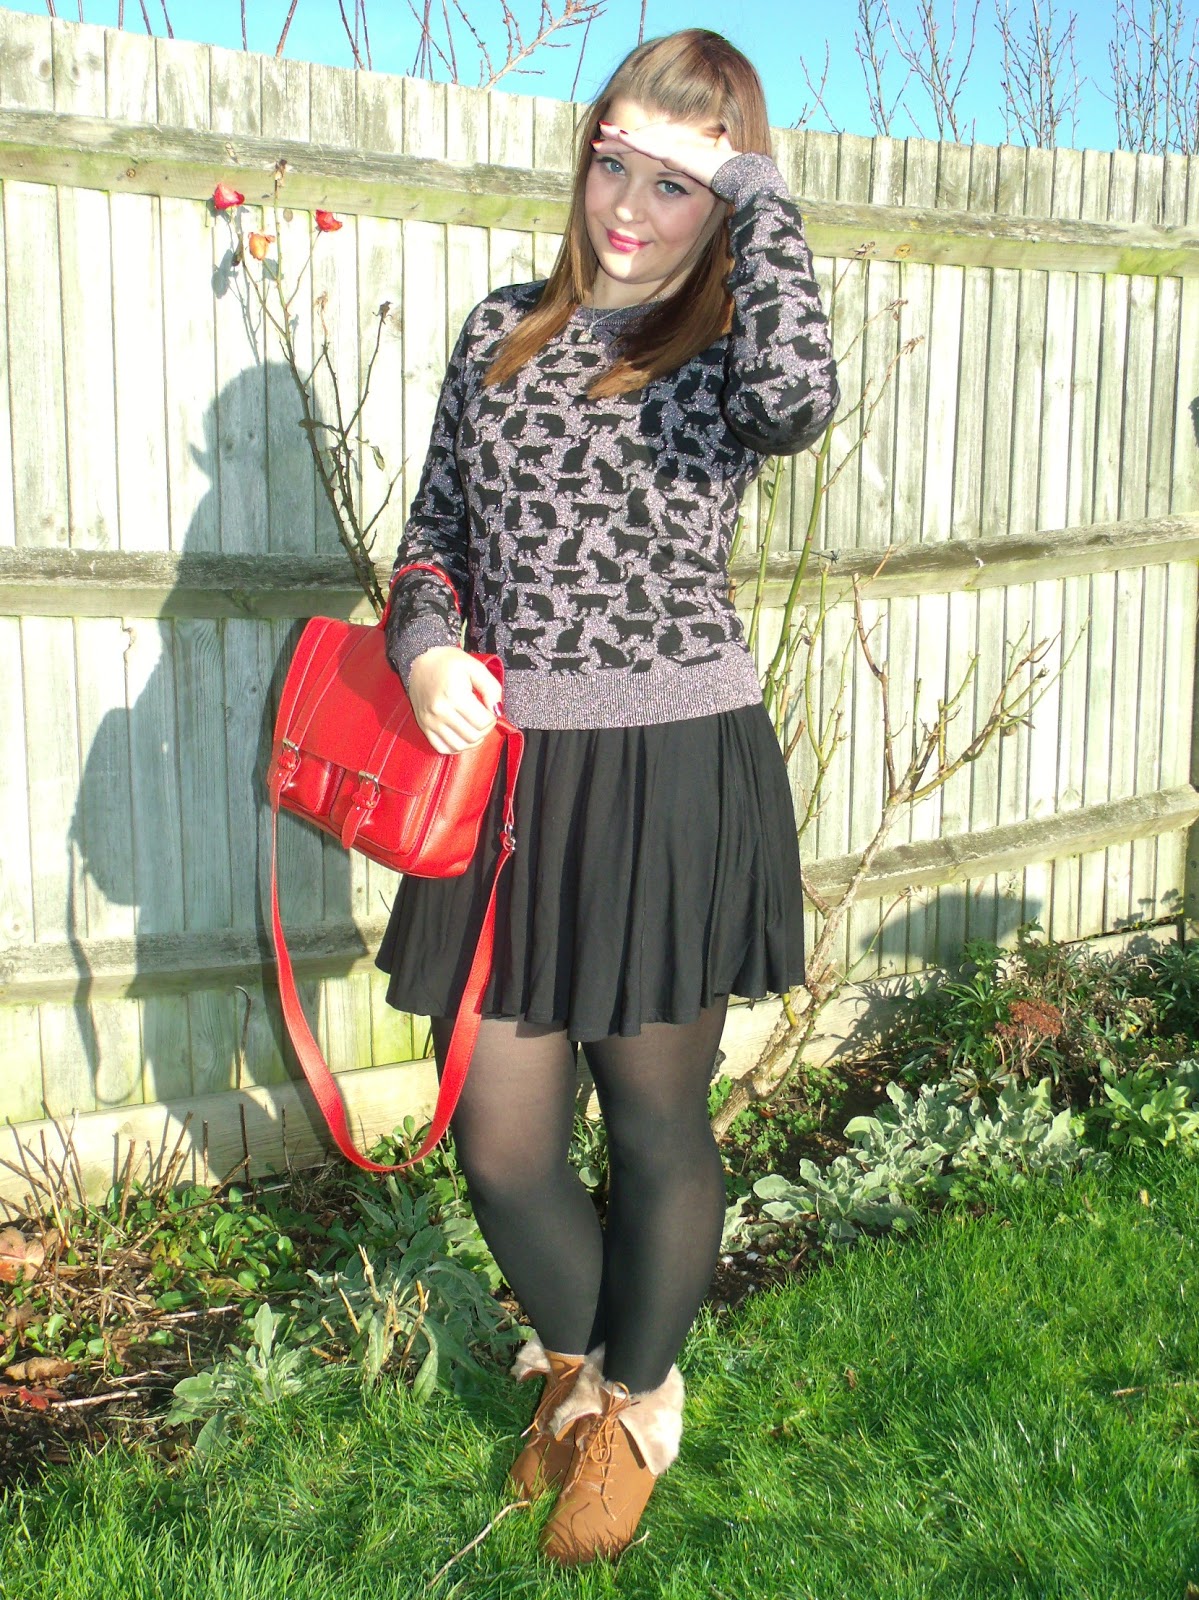 Sparkly Cat Jumper Outfit of the Day ♥ - Victoria's Vintage Blog